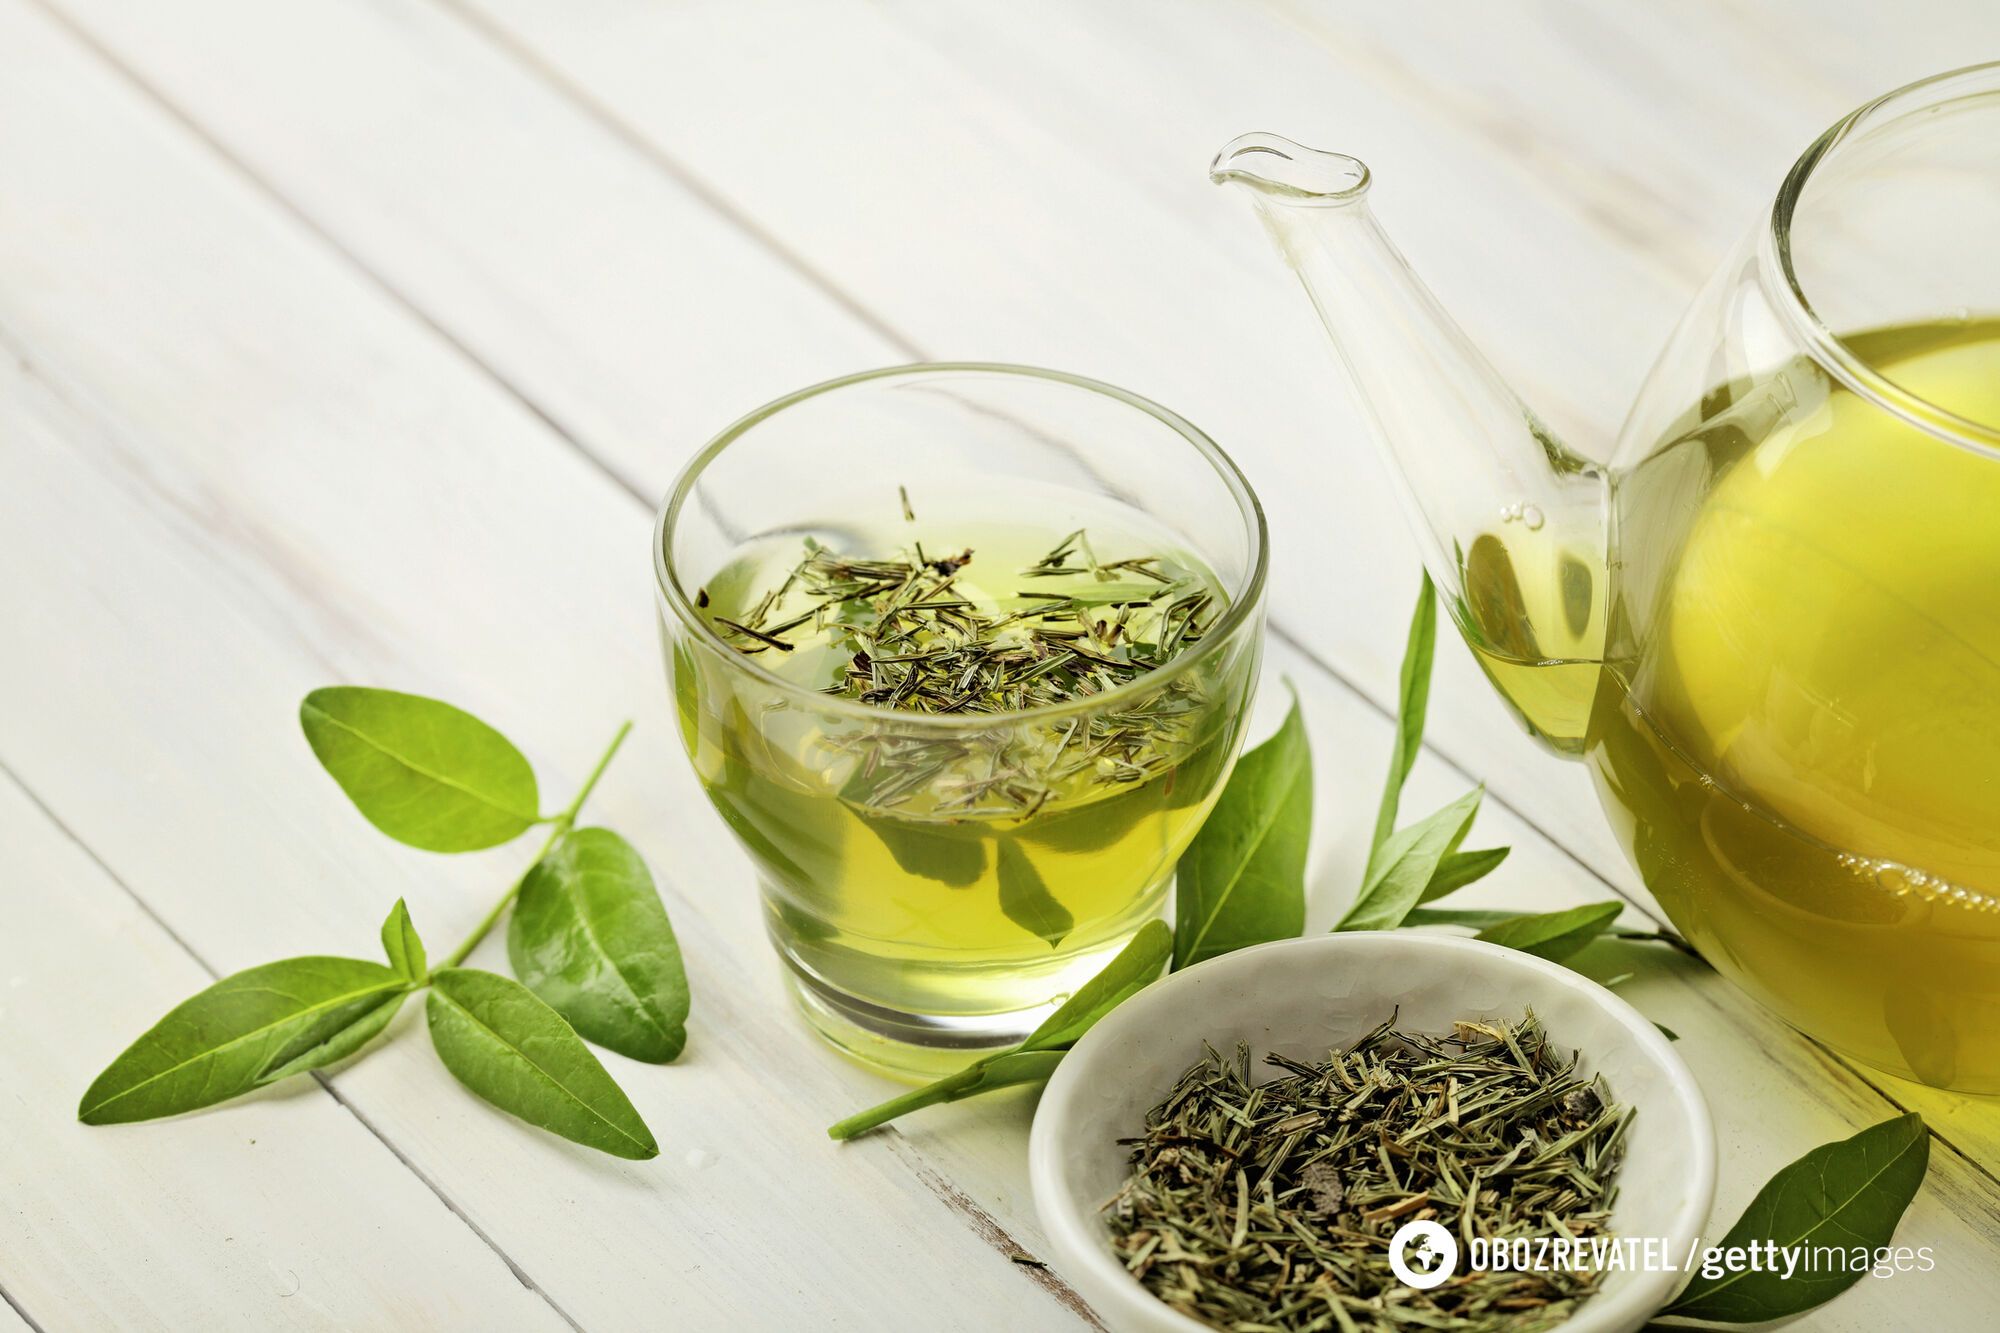 Green tea protects the skin from aging